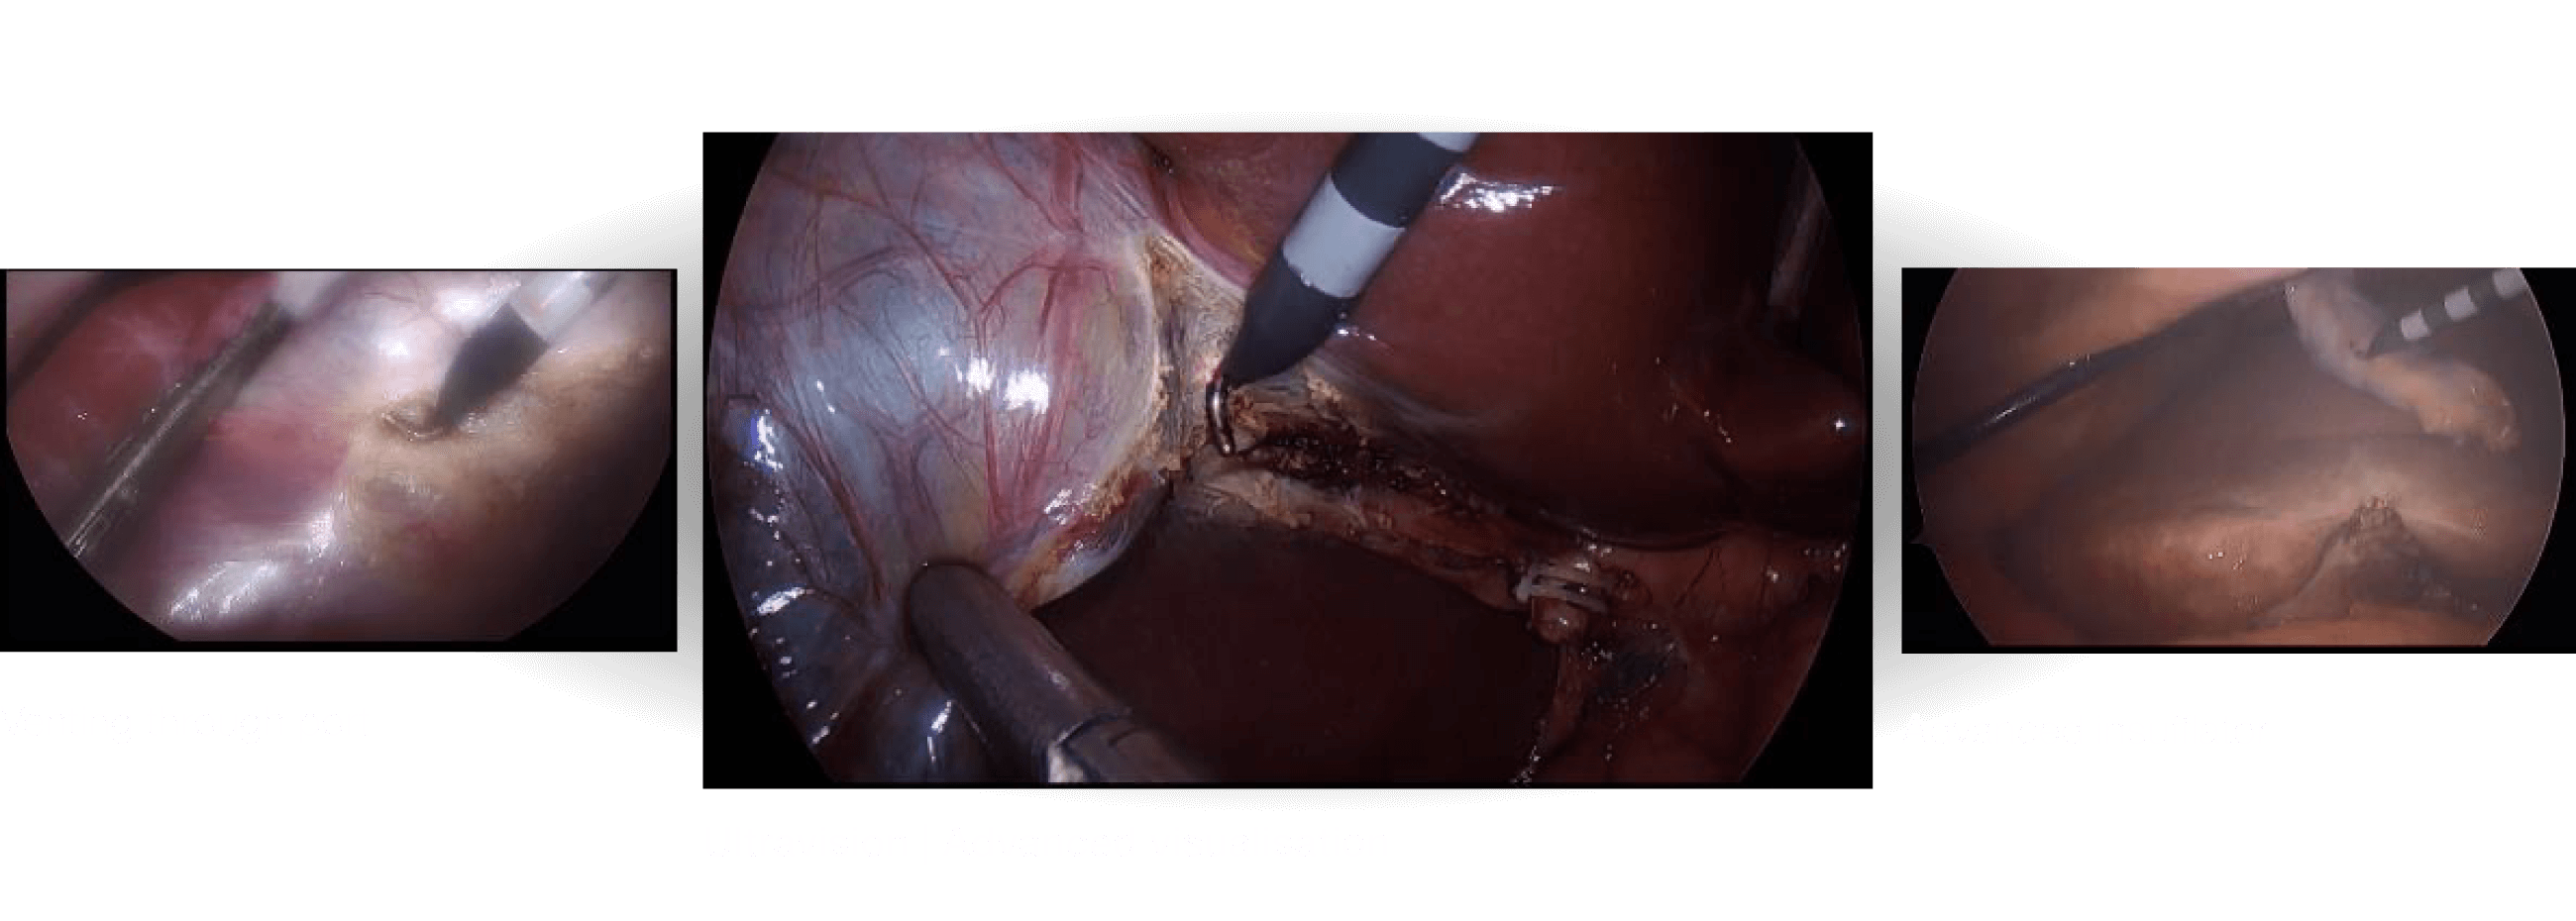 Performance data - Alesi Surgical